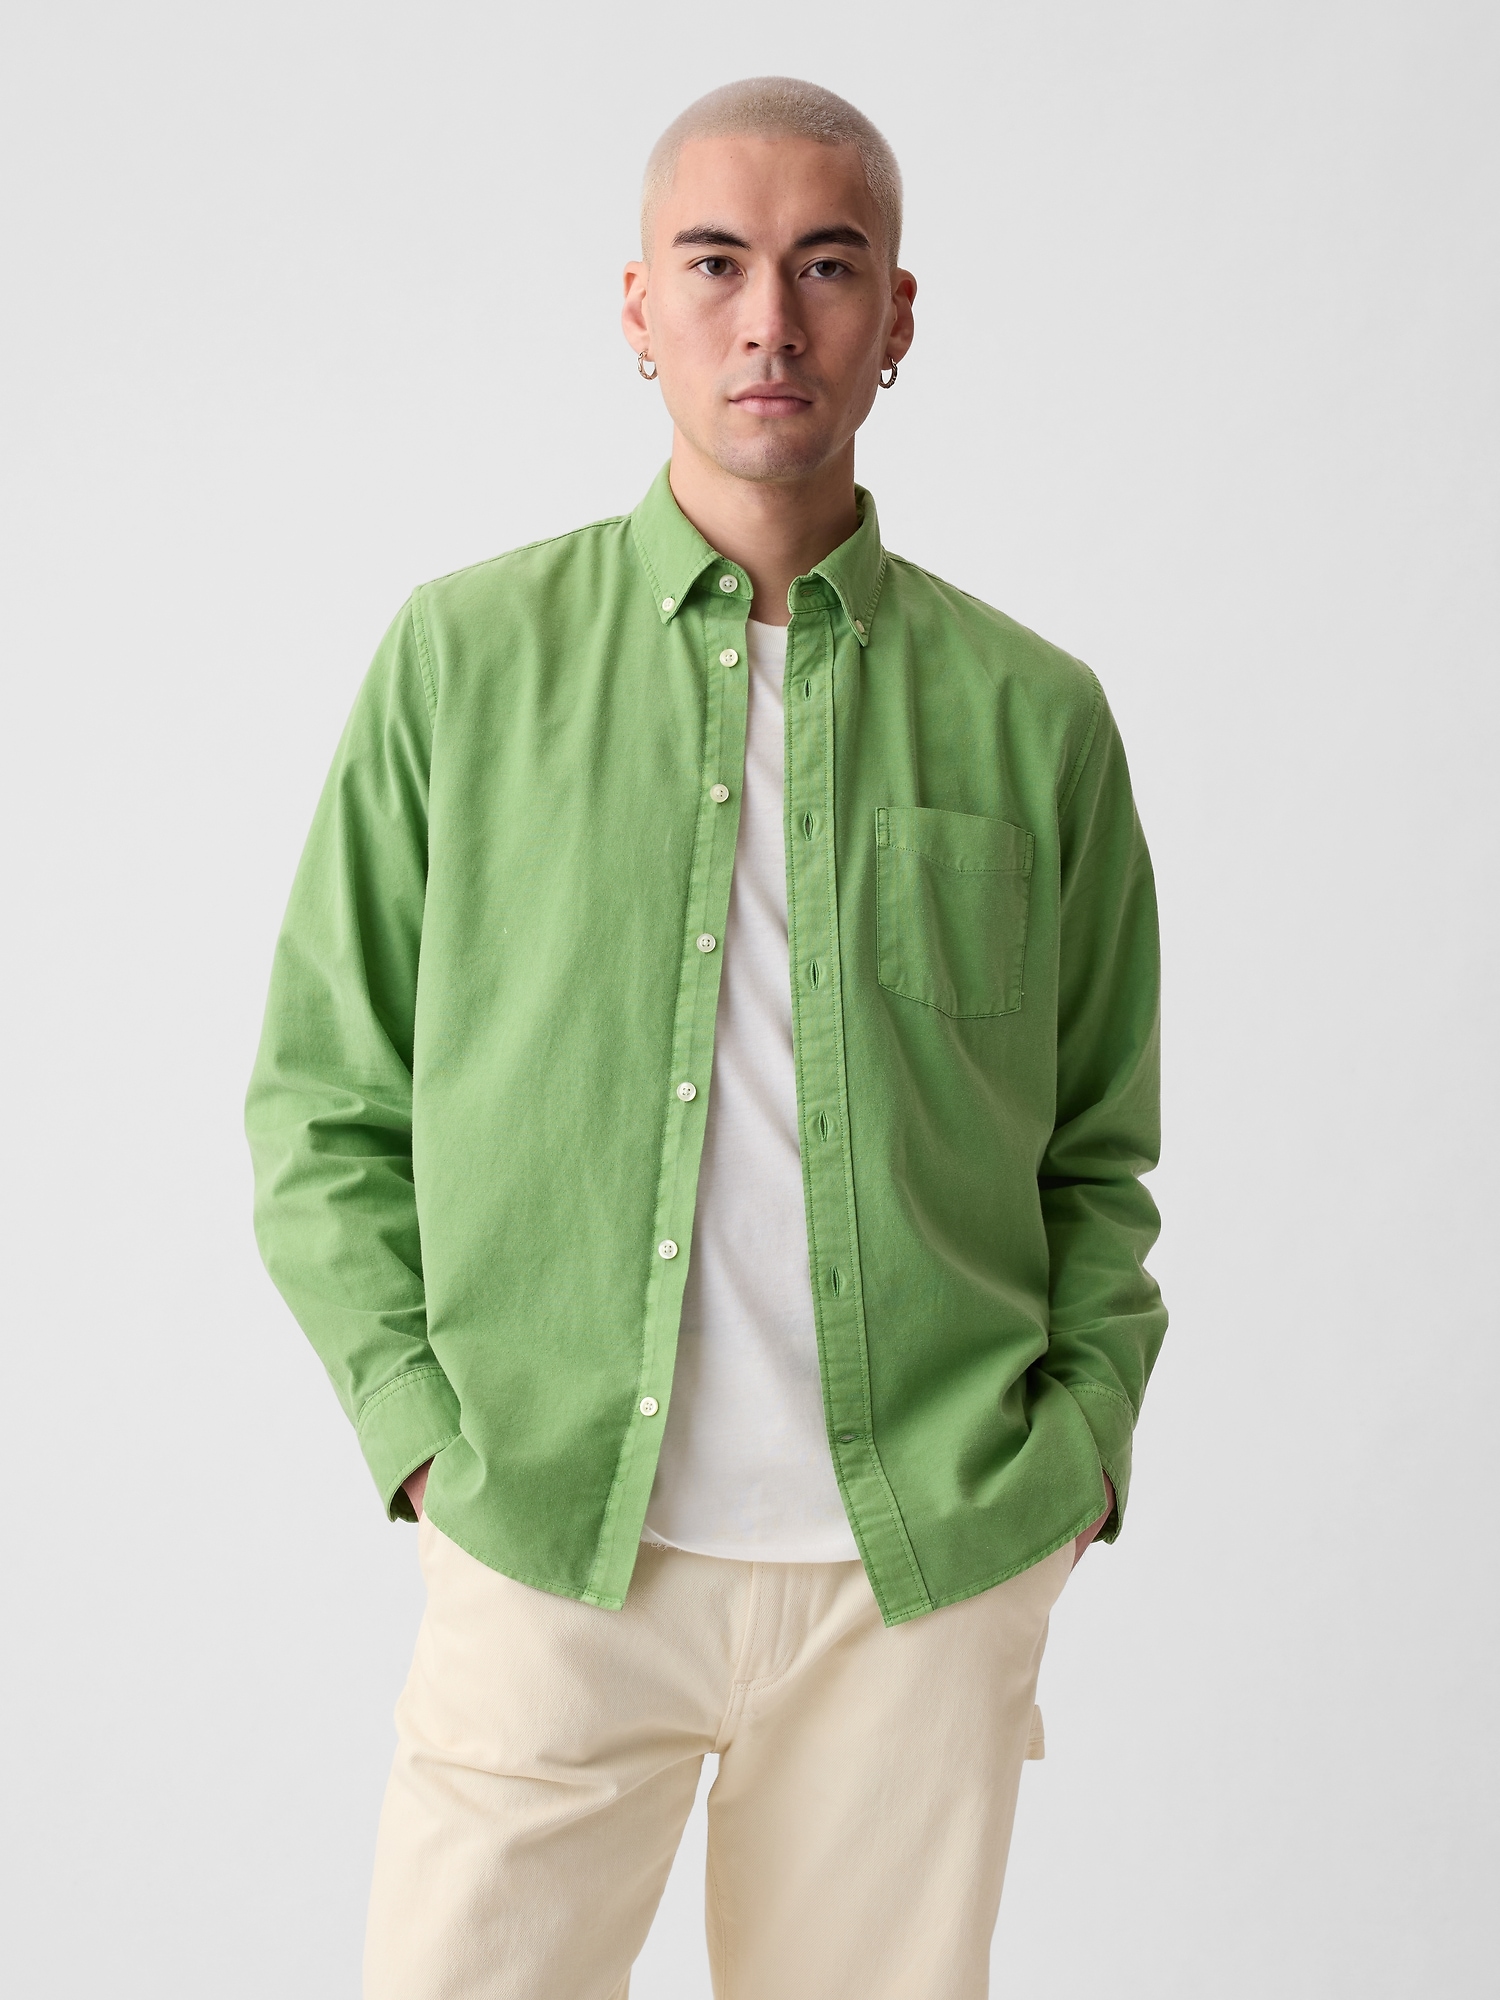 Classic Colorblock Oxford Shirt in Standard Fit with In-Conversion Cotton